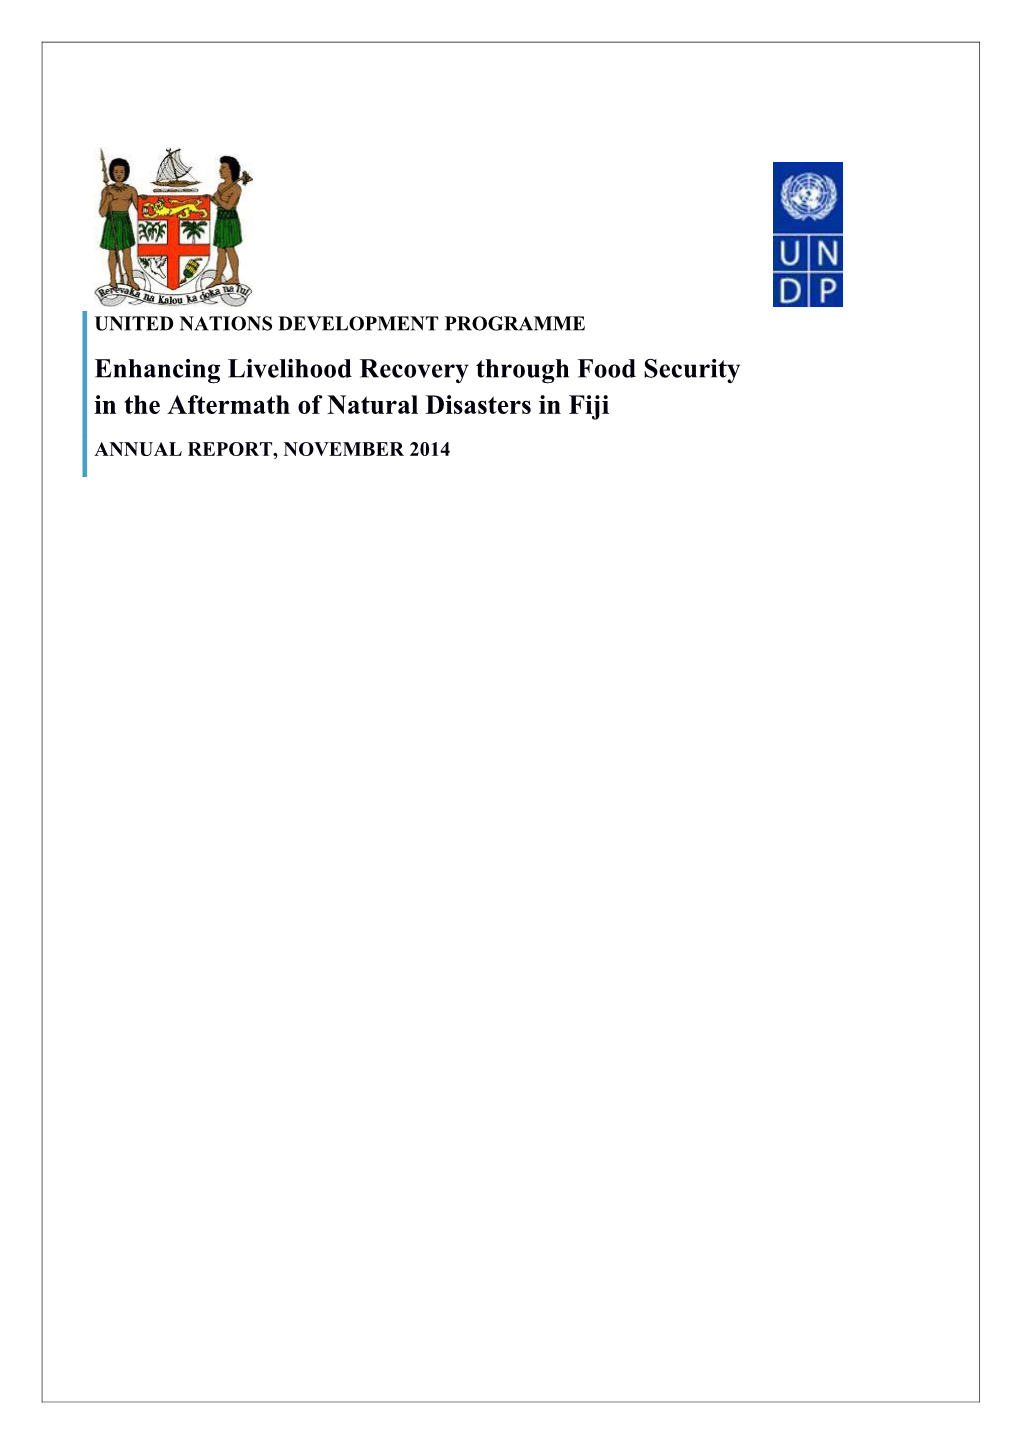 Enhancing Livelihood Recovery Through Food Security in the Aftermath of Natural Disasters